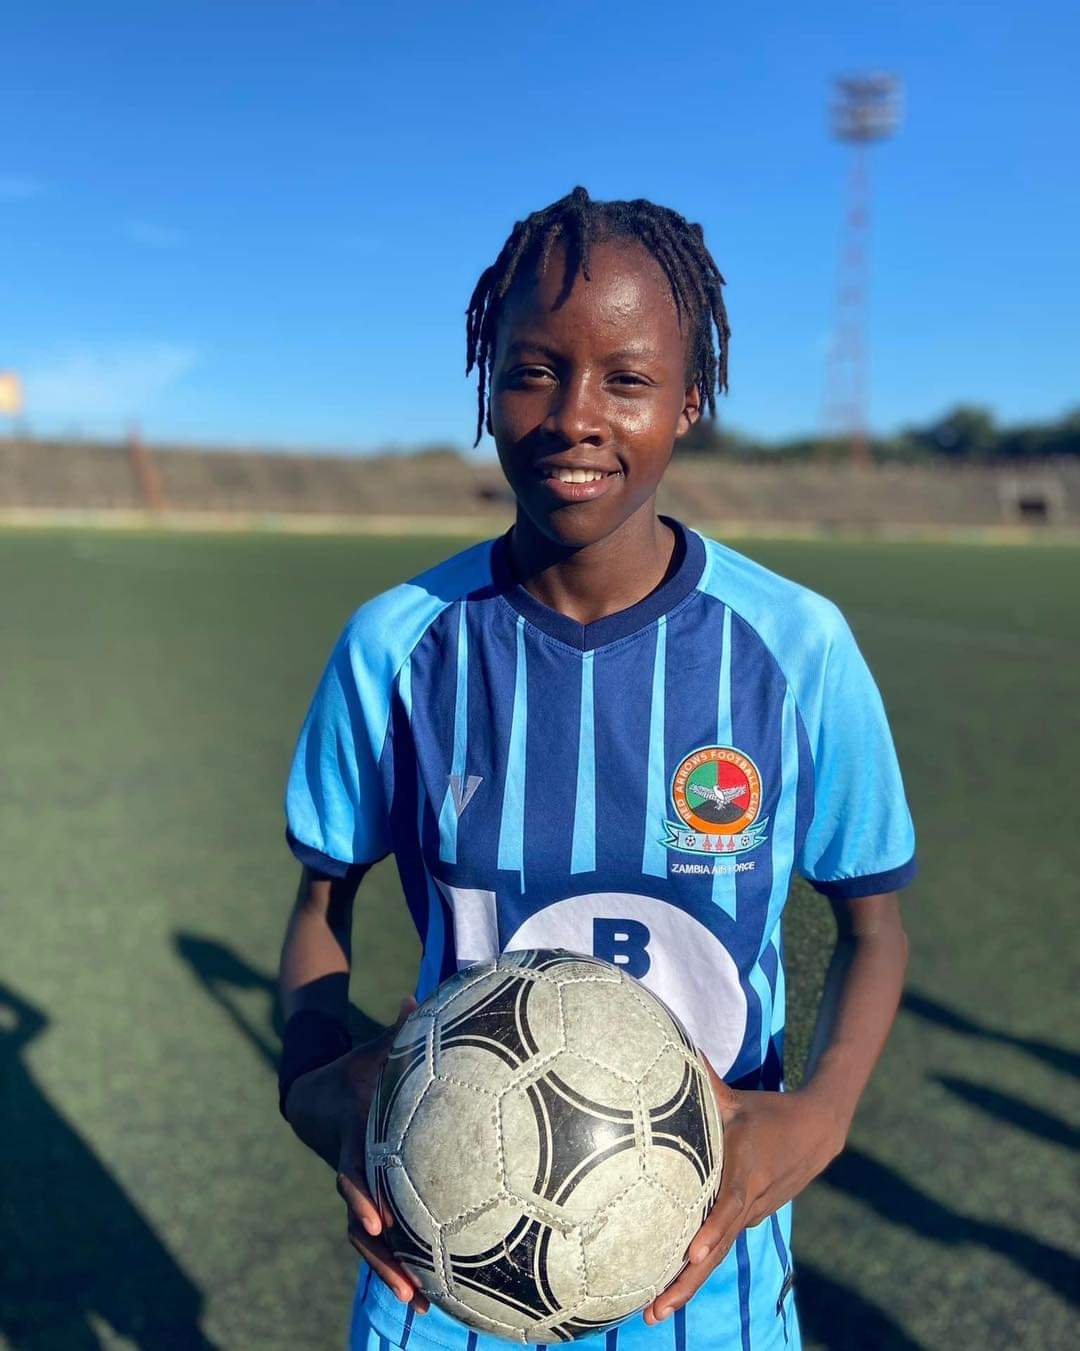 Ochumba has scored 19 goals in 19 games for red arrows womens side